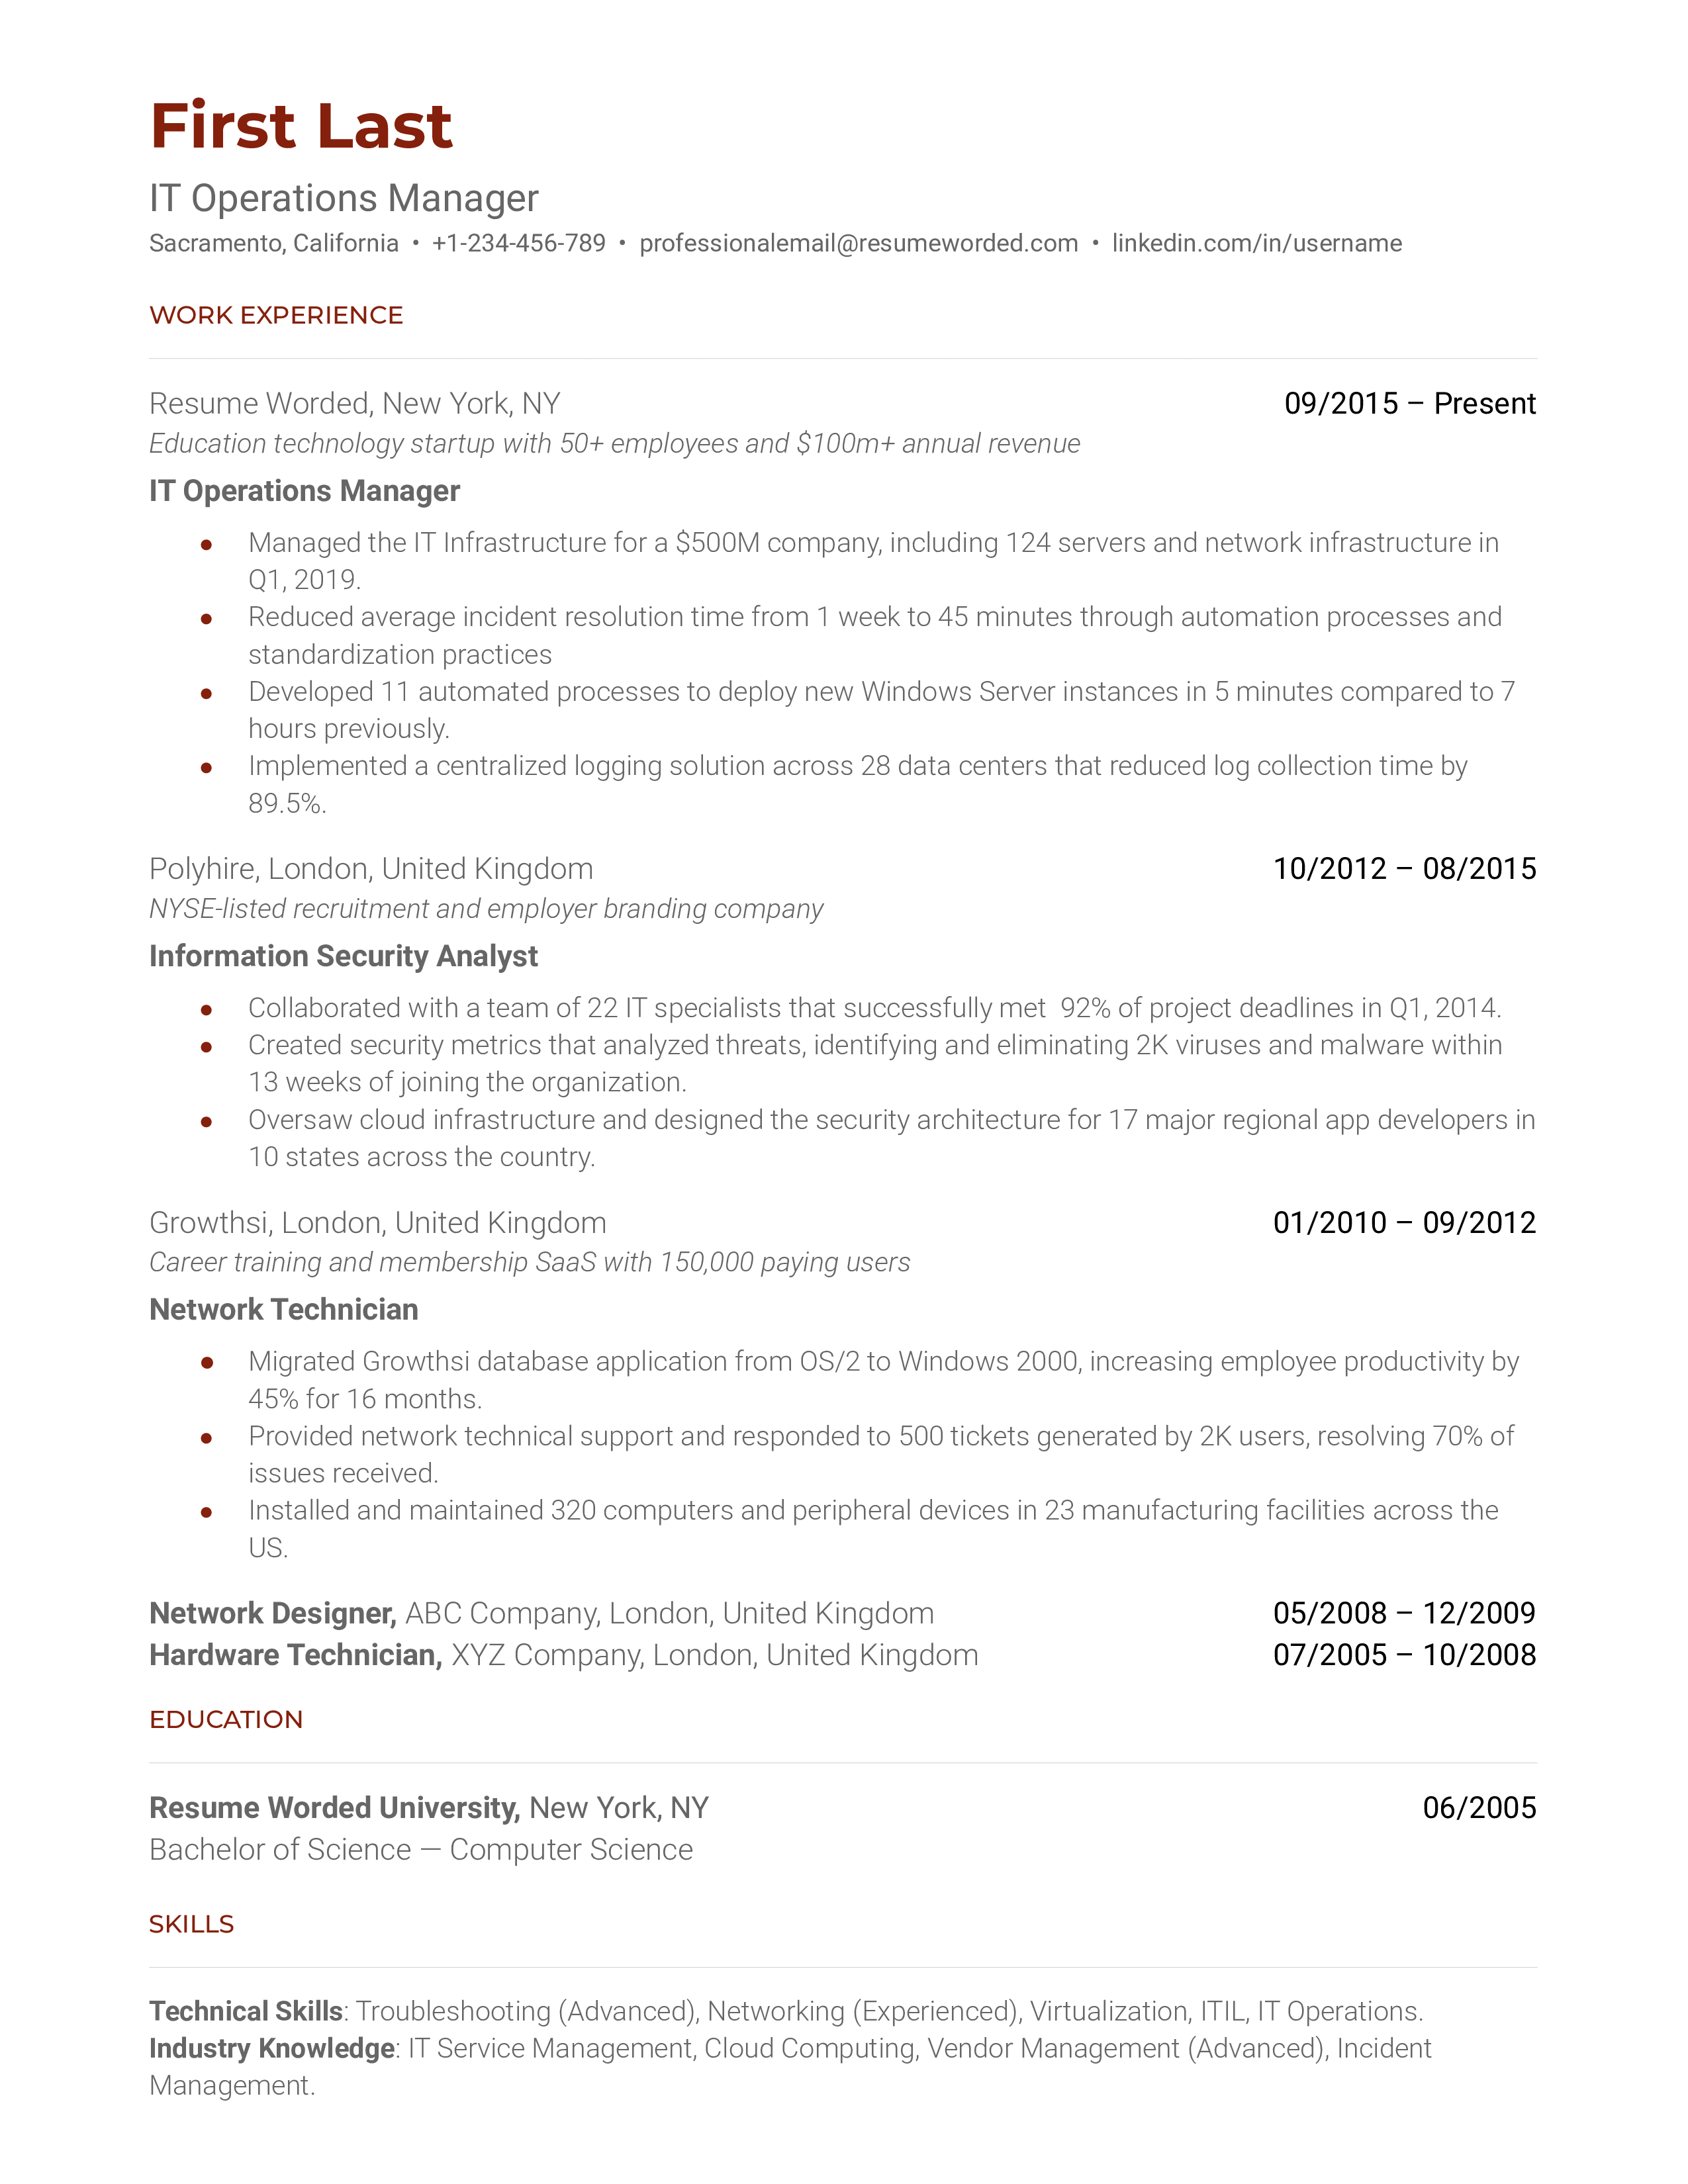 A CV for an IT operations manager highlighting their technical skills and project management experience.